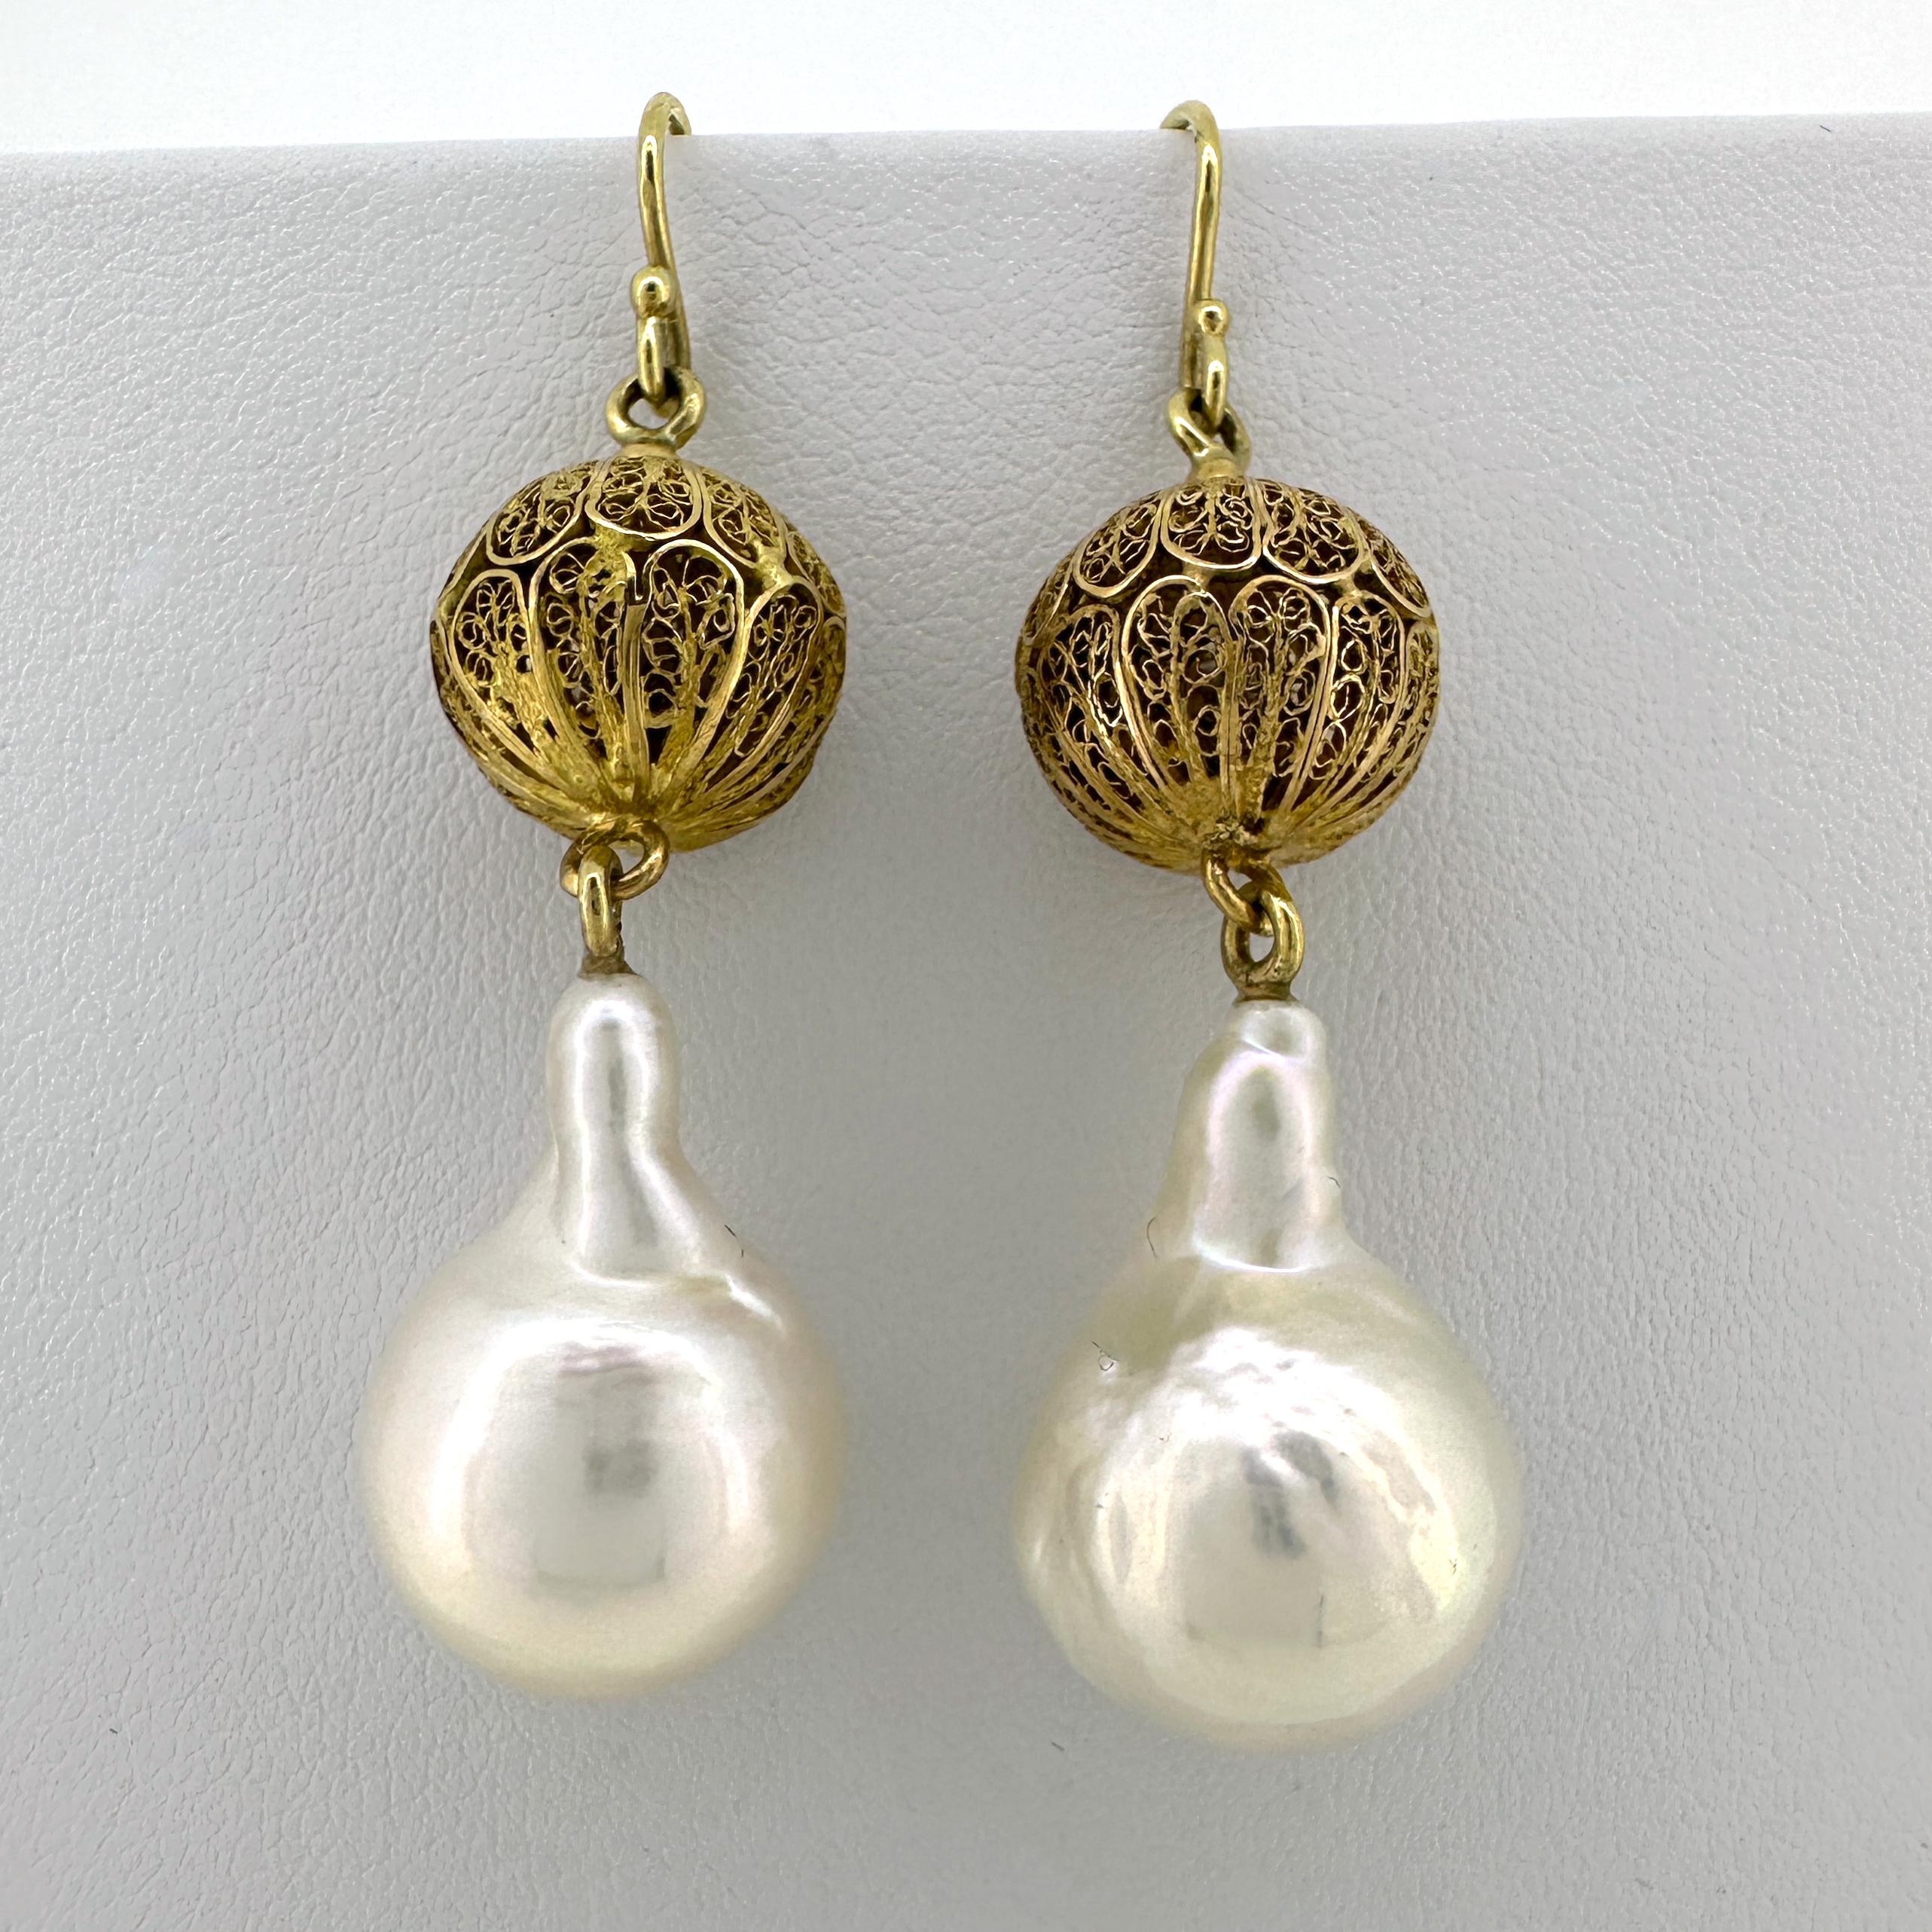 Dangle Wire Hook Earrings with Baroque Freshwater Pearls and 22K Gold Beads For Sale 5